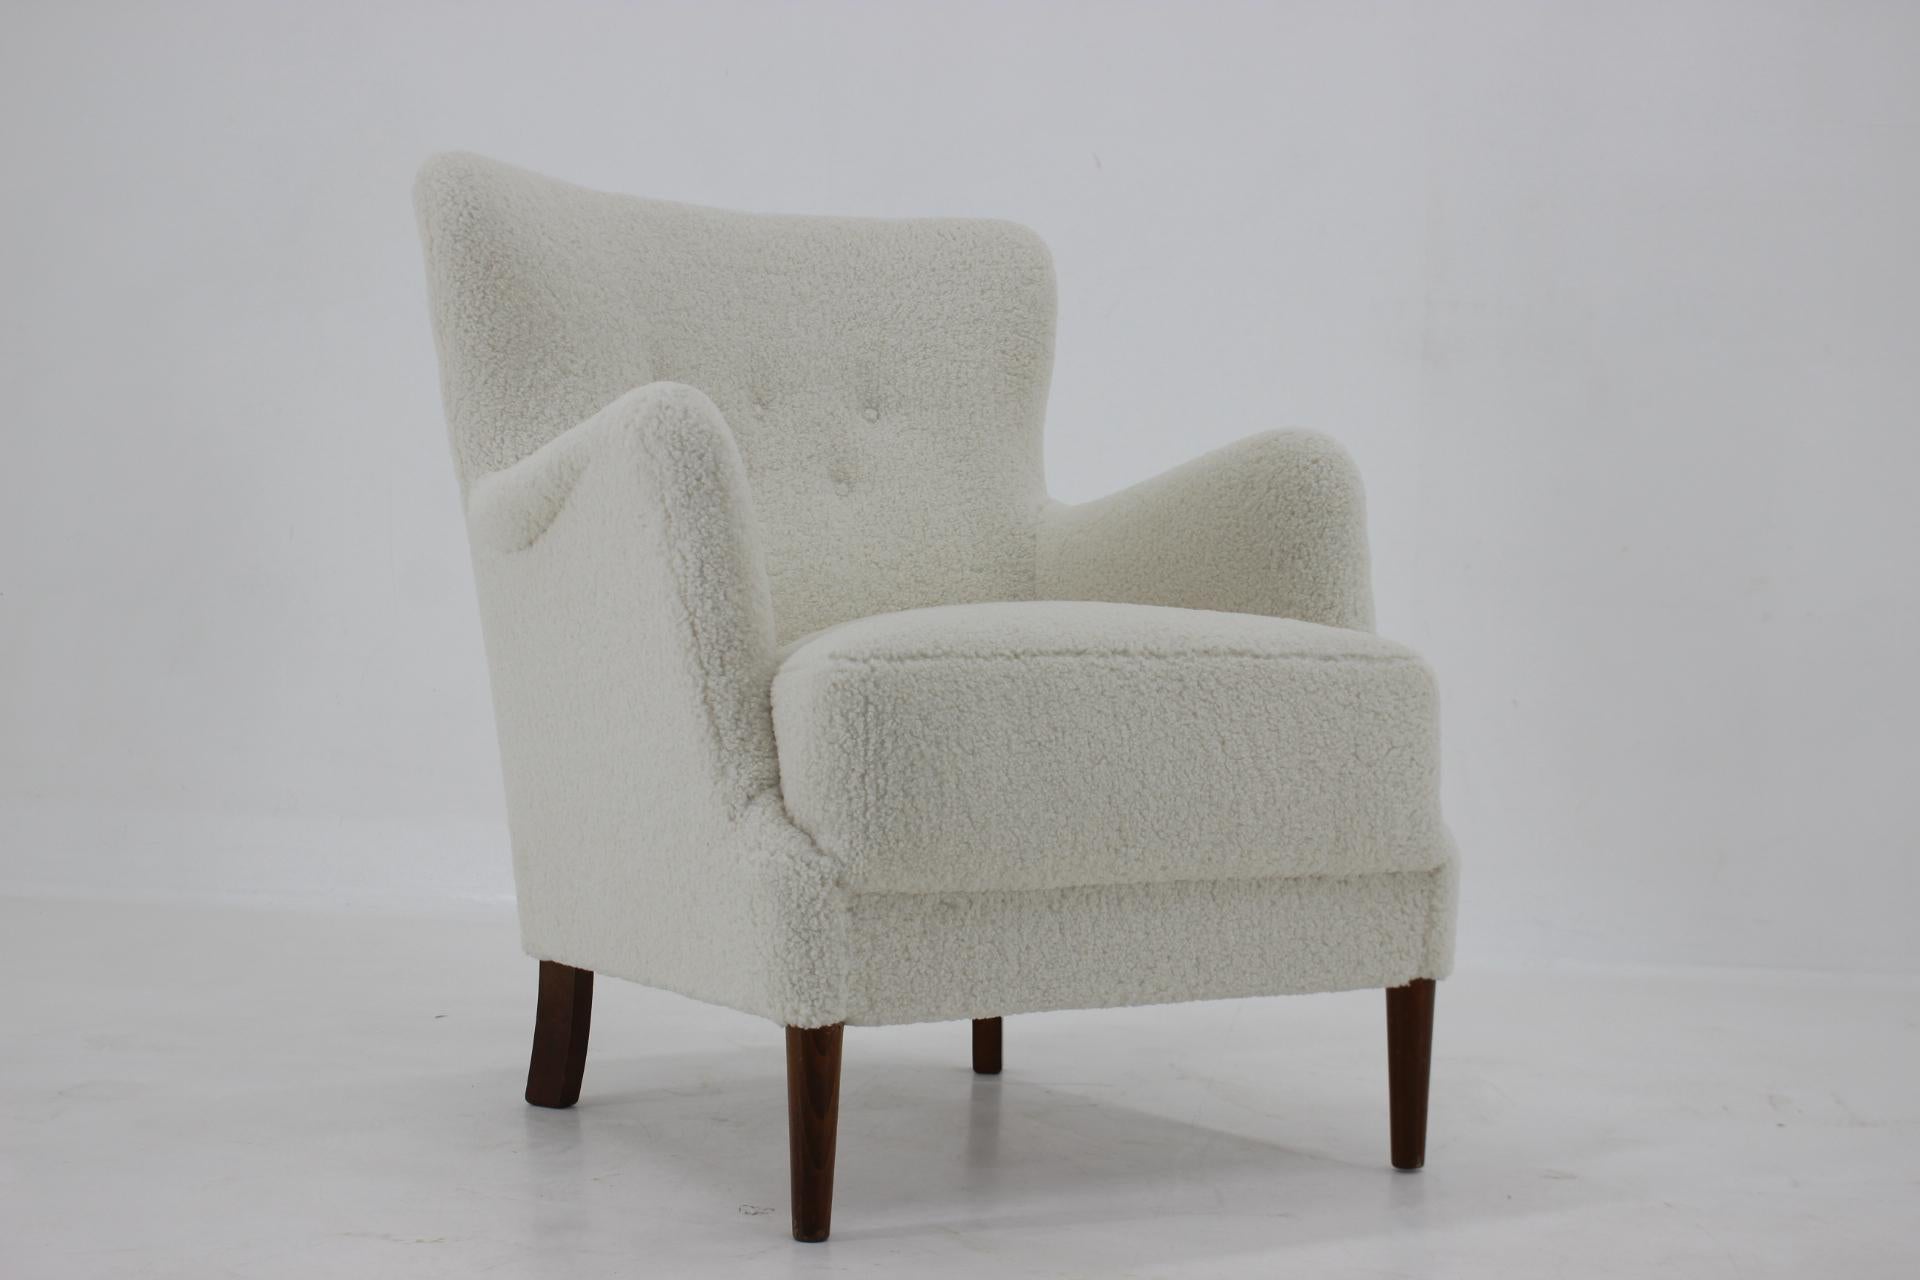 - Newly upholstered Quality synthetic fabric imitating sheepskin
- The seat height is 42 cm.